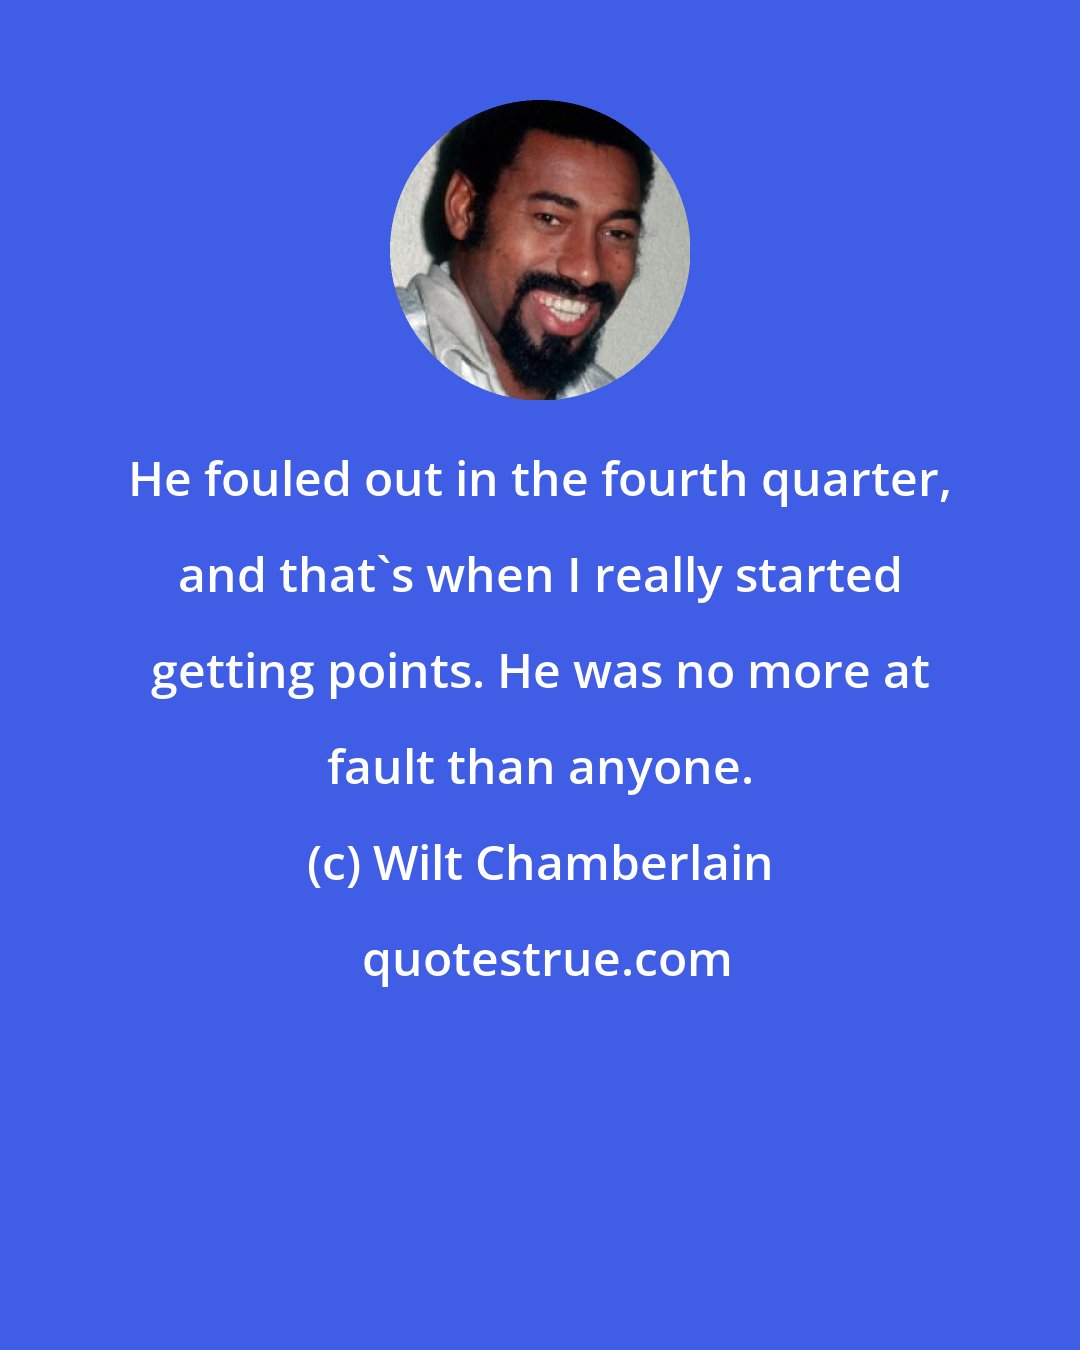 Wilt Chamberlain: He fouled out in the fourth quarter, and that's when I really started getting points. He was no more at fault than anyone.